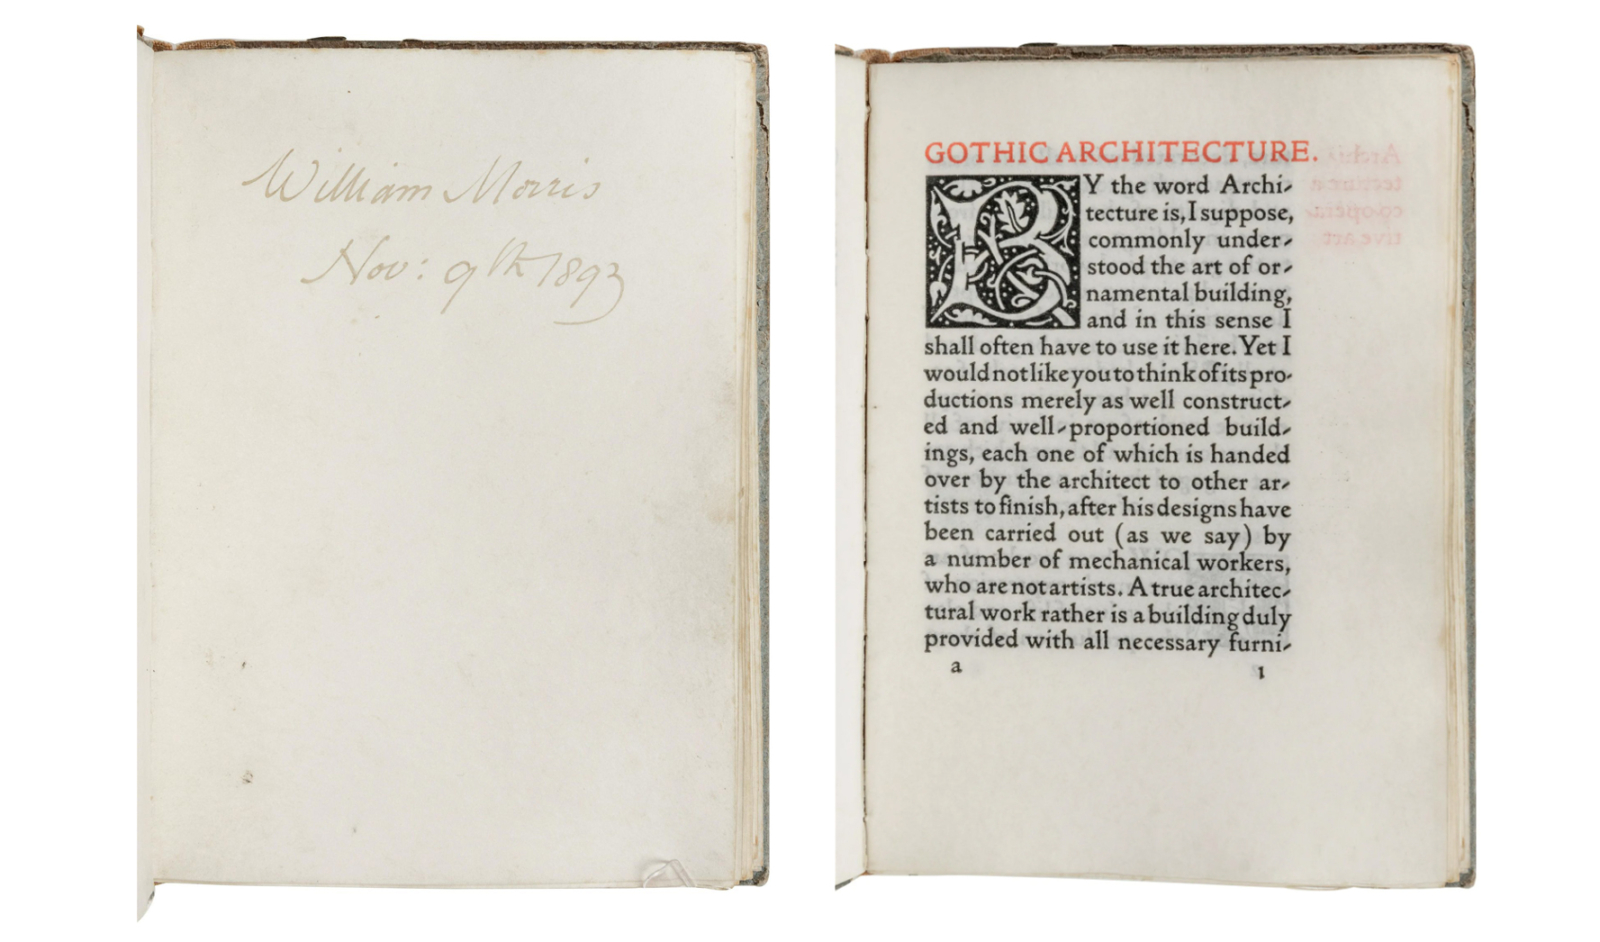 William Morris’s own copy of Gothic Architecture: A Lecture for the Arts and Crafts Exhibition Society, published by Kelmscott Press, made $12,000 plus the buyer’s premium in November 2019. Image courtesy of Hindman and LiveAuctioneers.